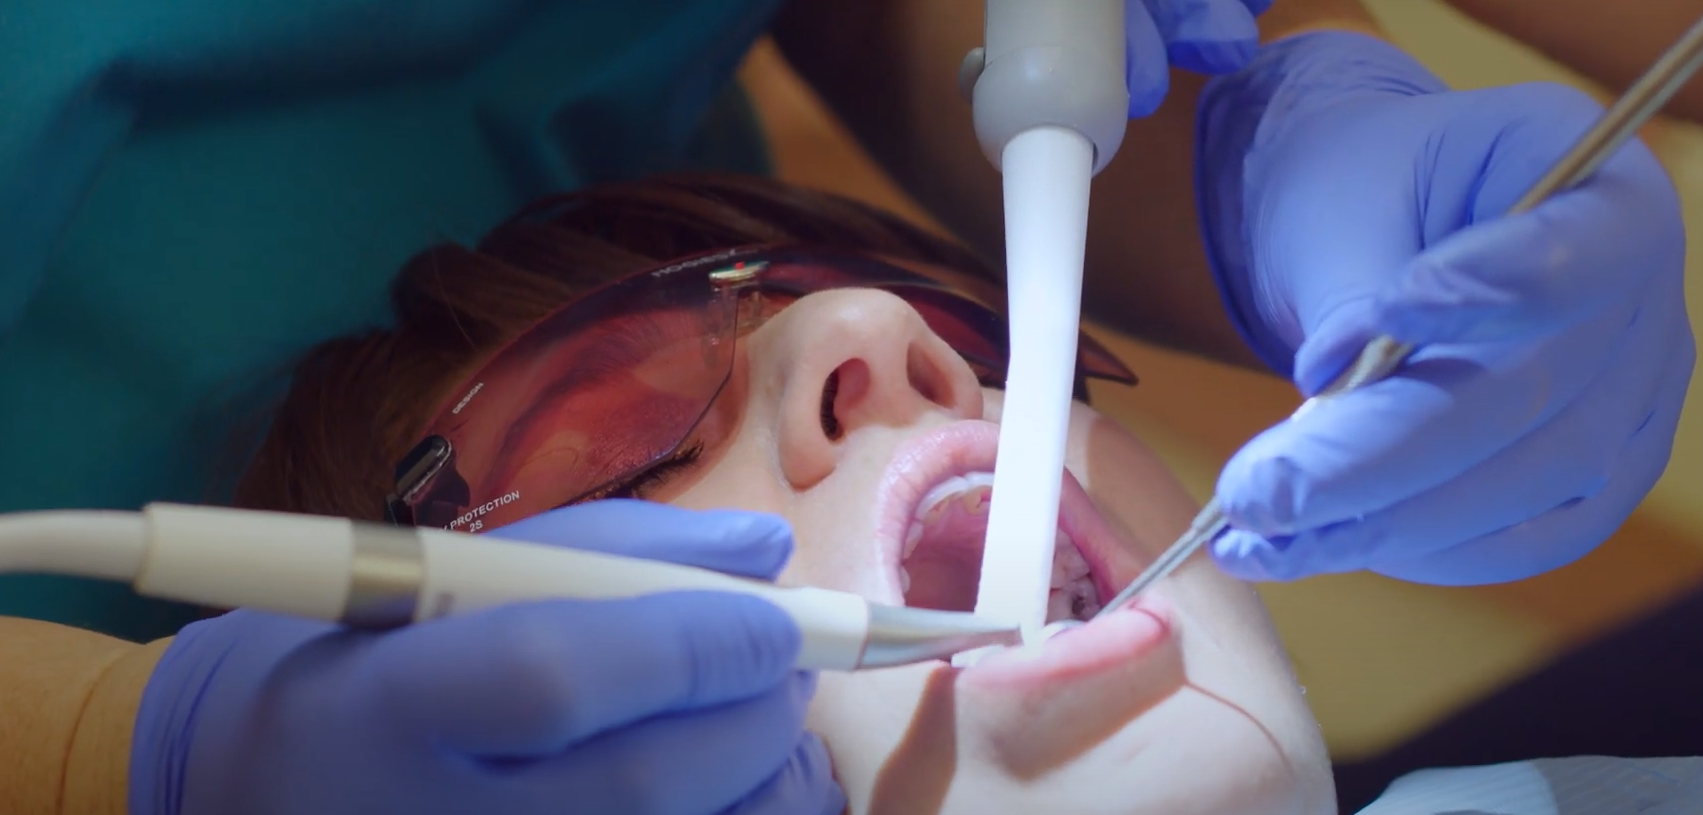 Jacksonville dentist adds industry-changing, pain-free approach to teeth cleaning